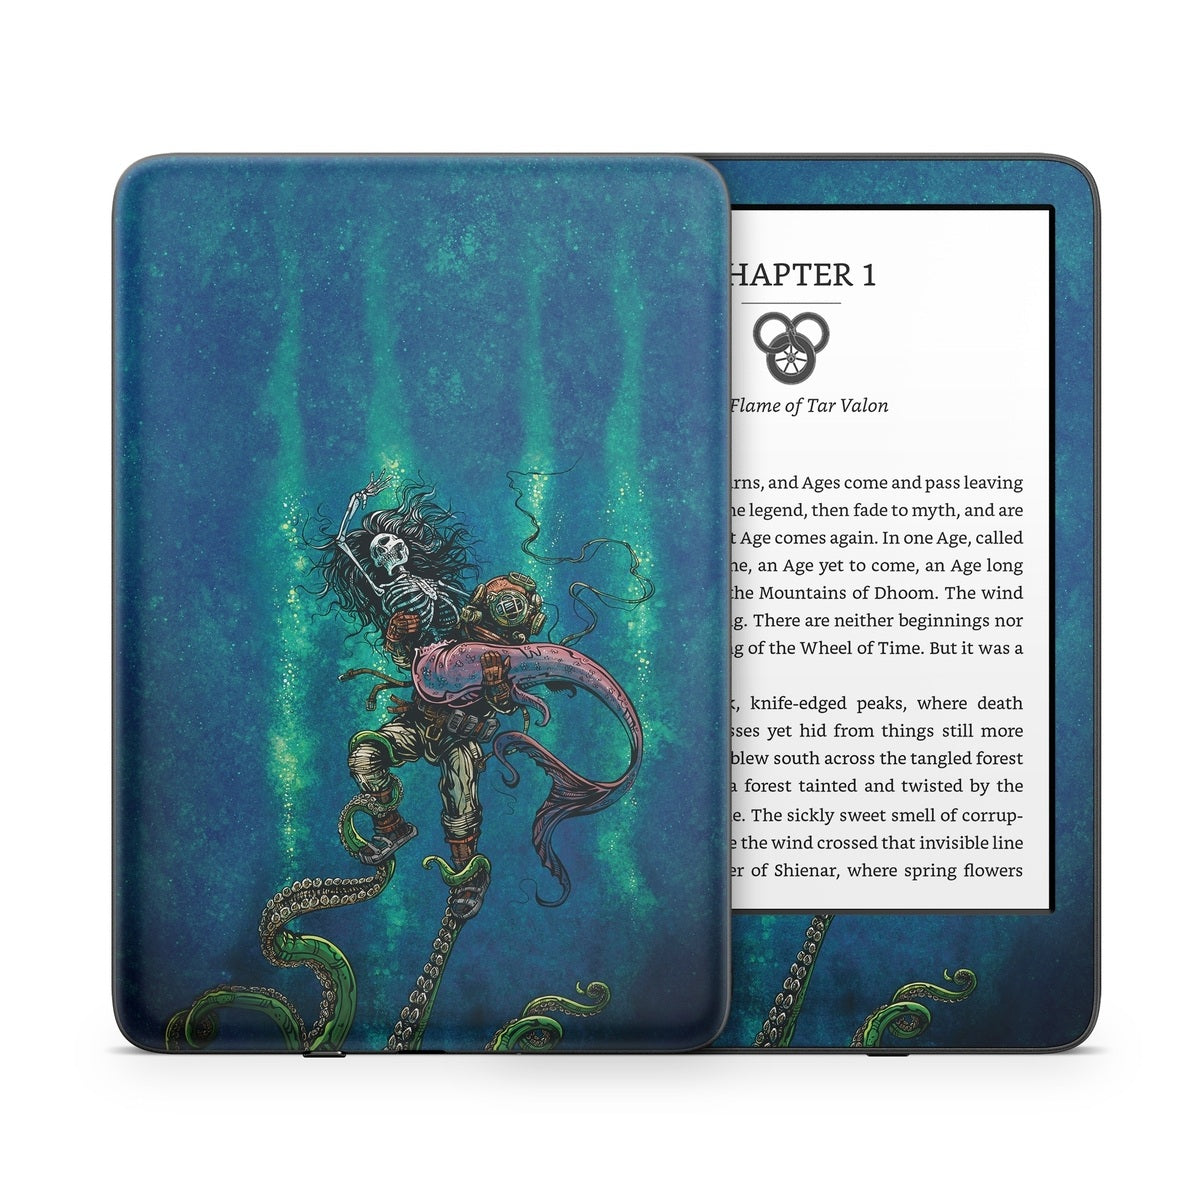 Catch Or Release - Amazon Kindle Skin